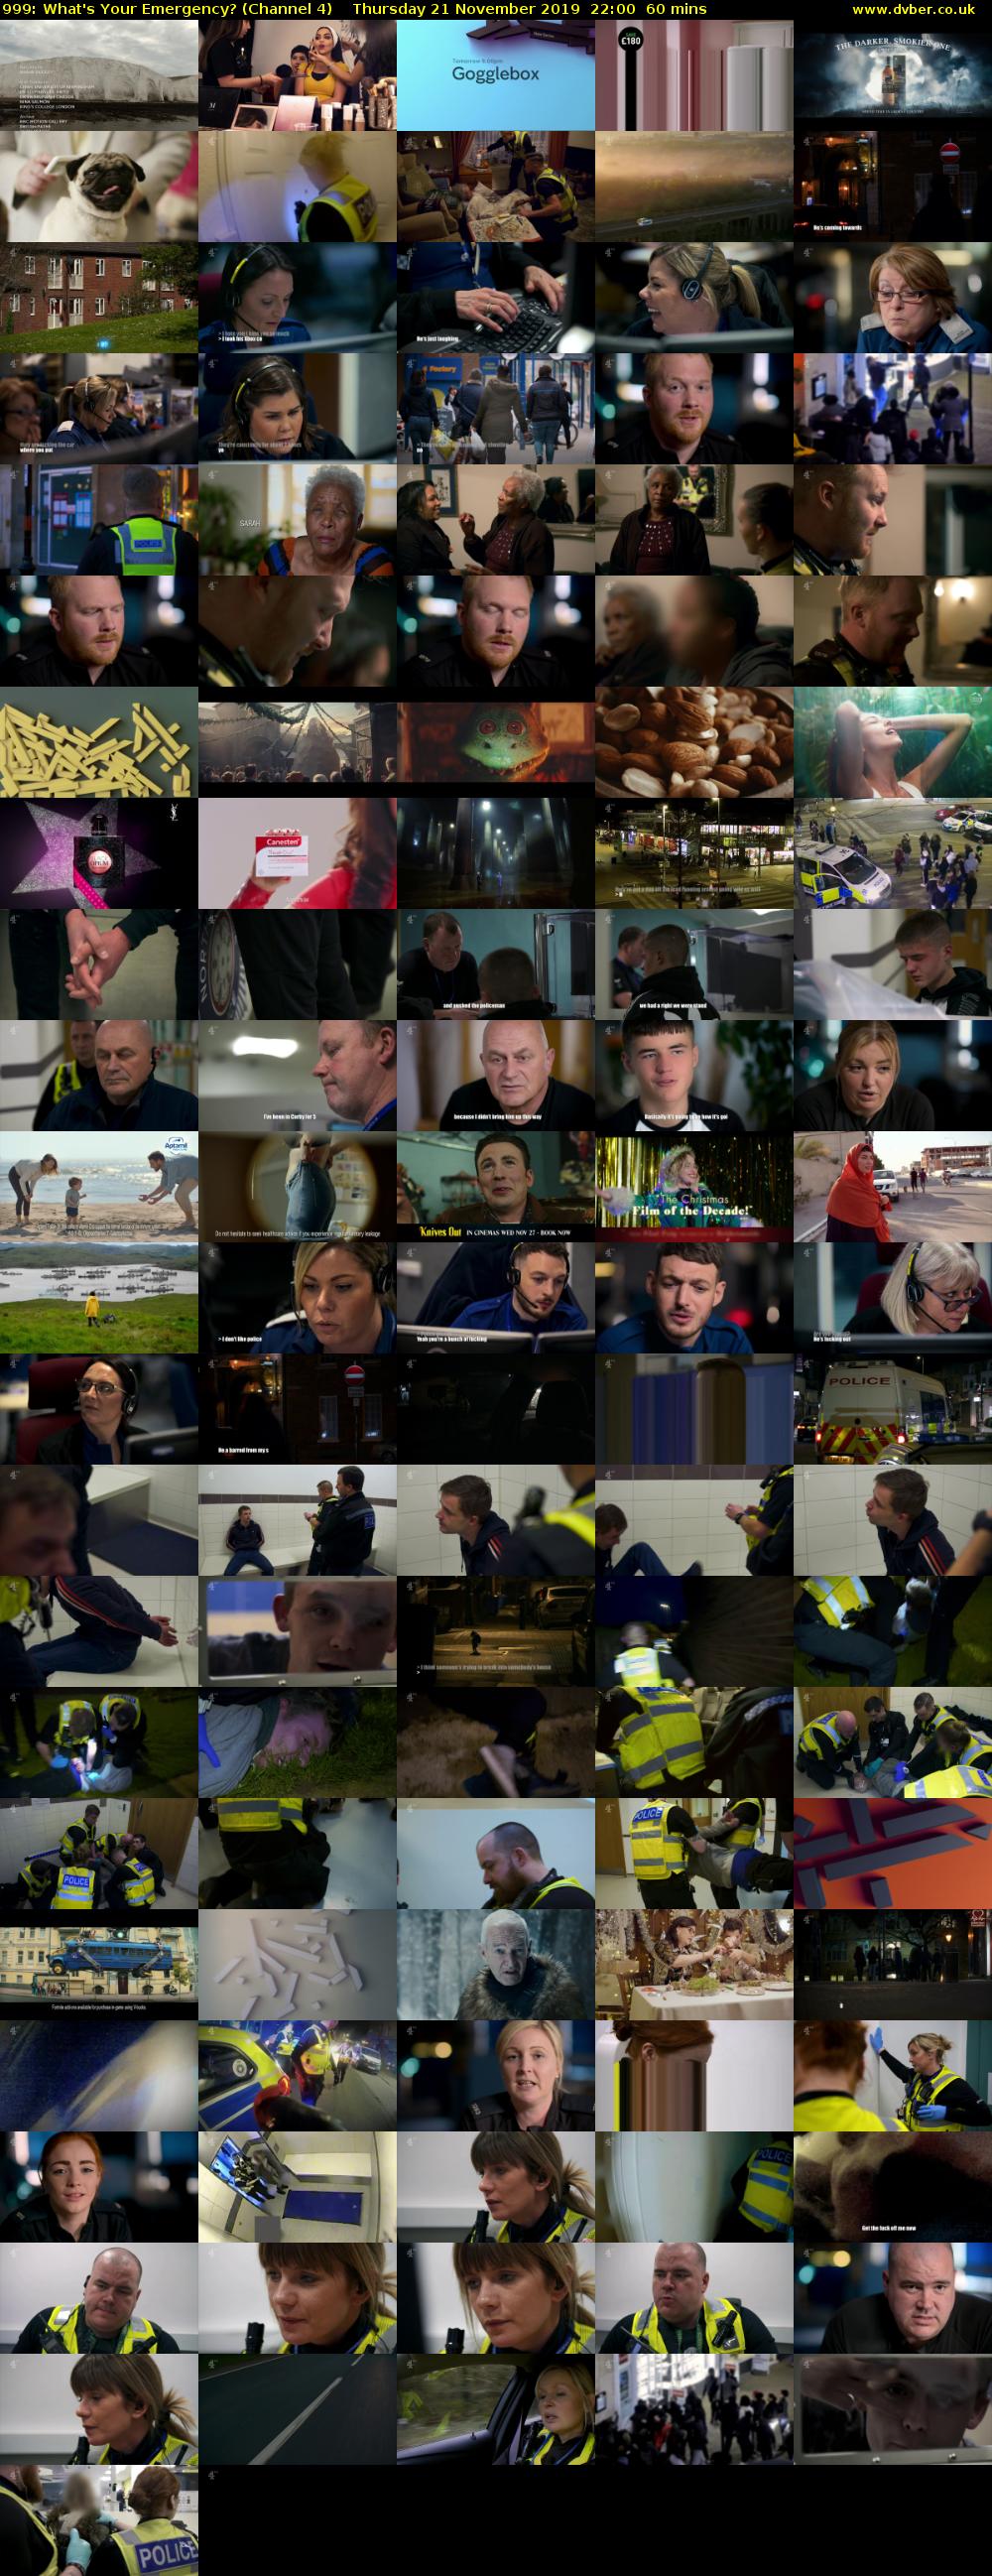 999: What's Your Emergency? (Channel 4) Thursday 21 November 2019 22:00 - 23:00